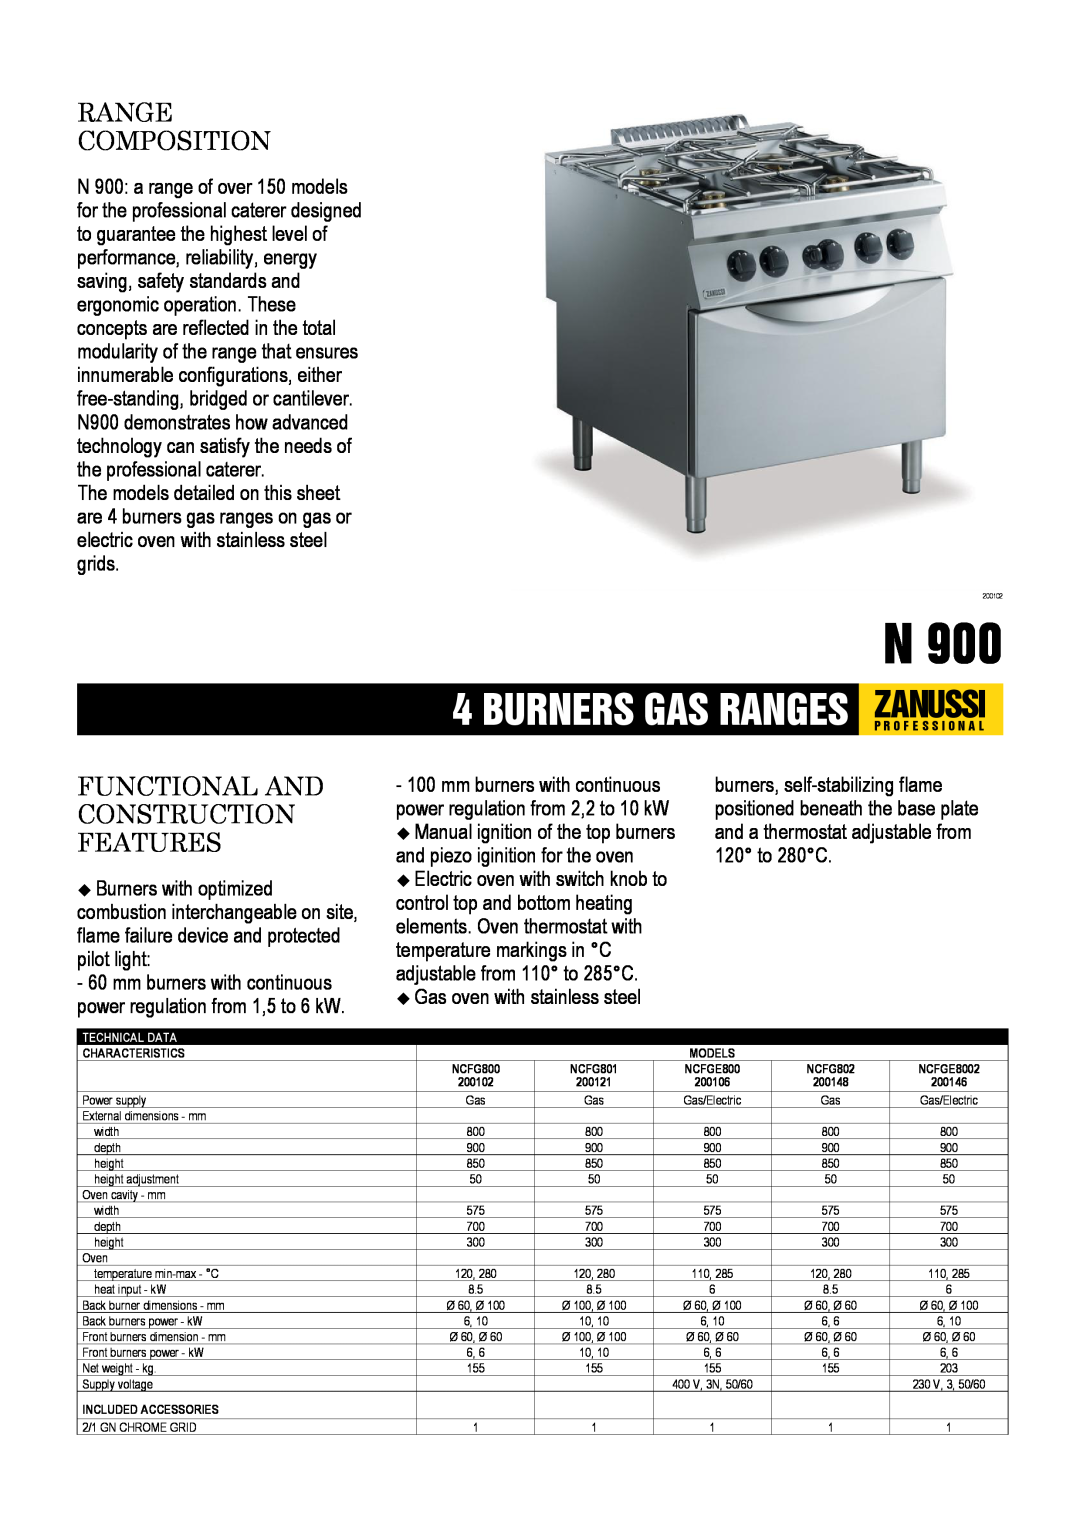 Zanussi NCFGE8002 dimensions Gas oven with stainless steel, Range Composition, Functional And Construction Features 